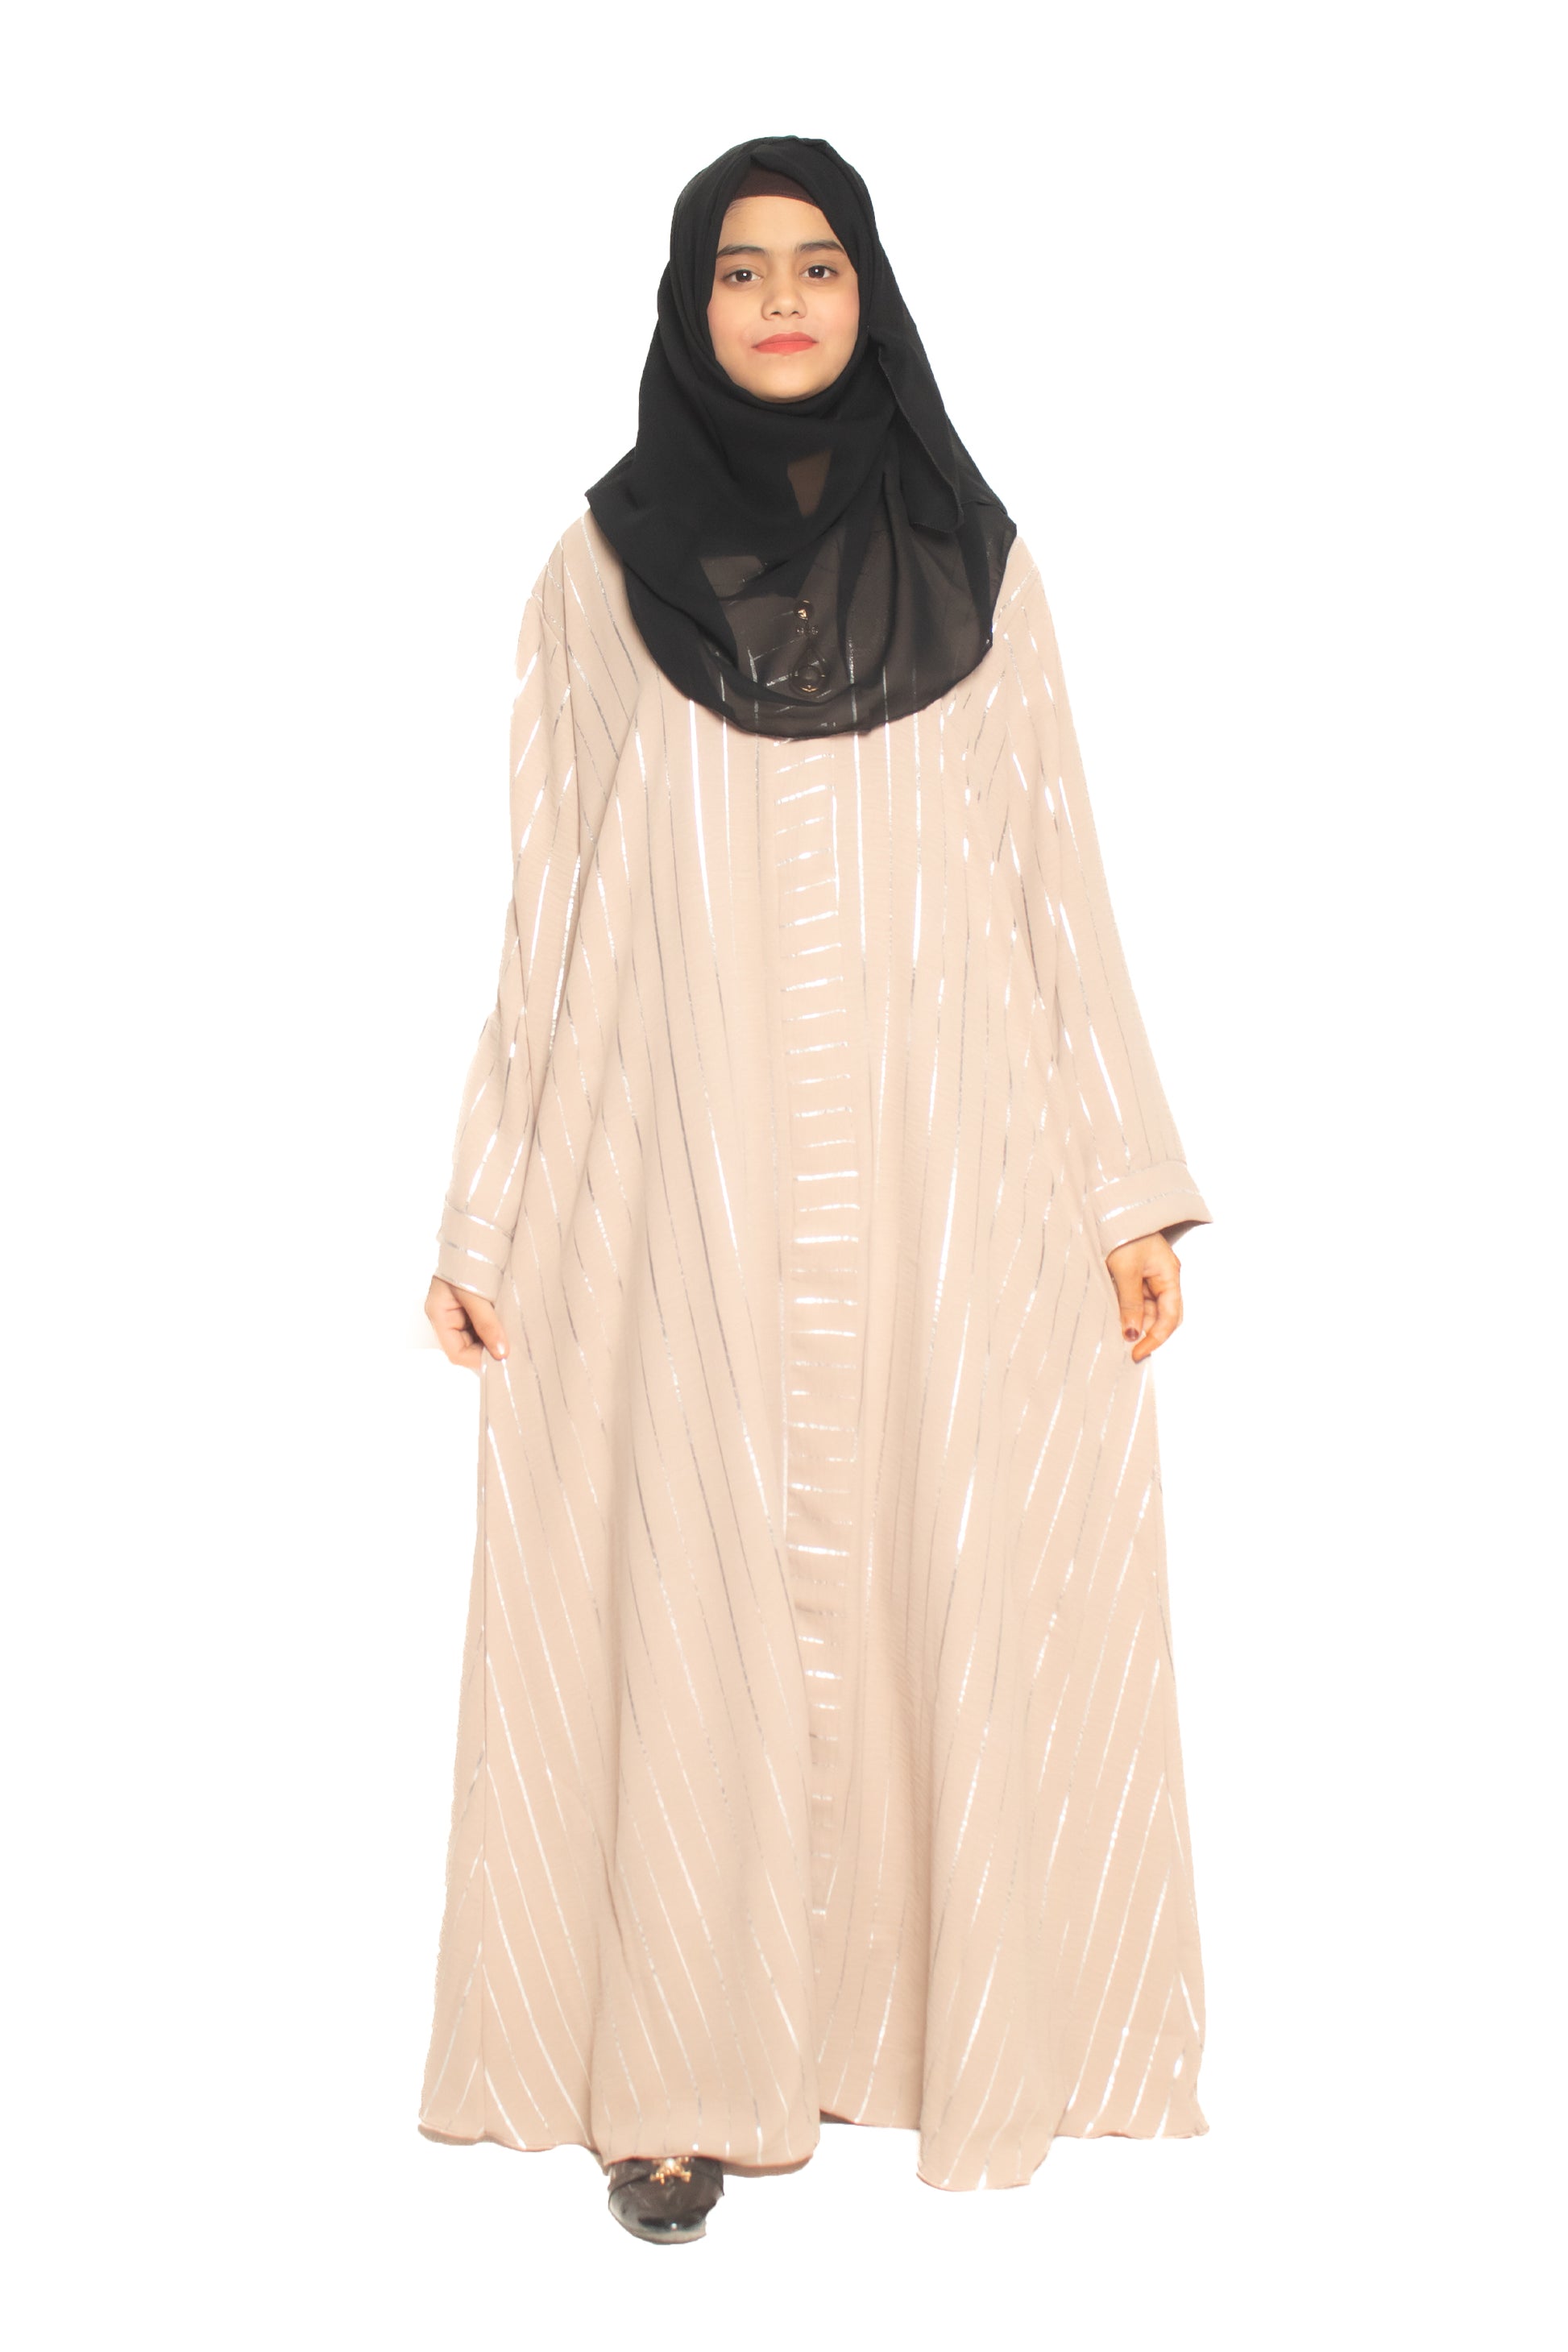 Modest City Self Design Beige Parallel Stripes With Broach Abaya or Burqa With Hijab for Women & Girls-Series Laiba